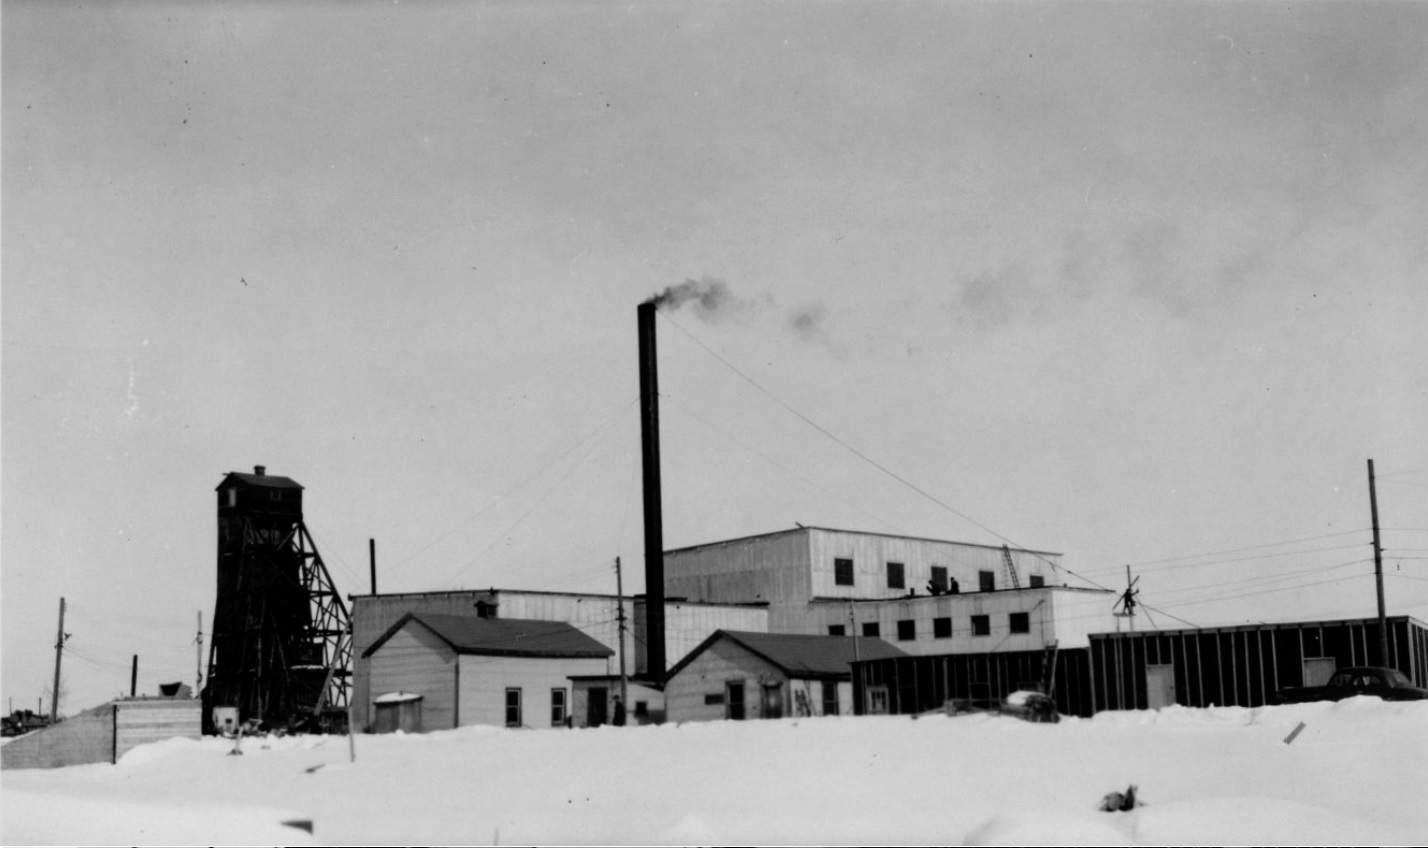 Black-and-white photograph of several mining buildings made of planks, including a headframe and a chimney and featuring a blanket of snow on the ground.